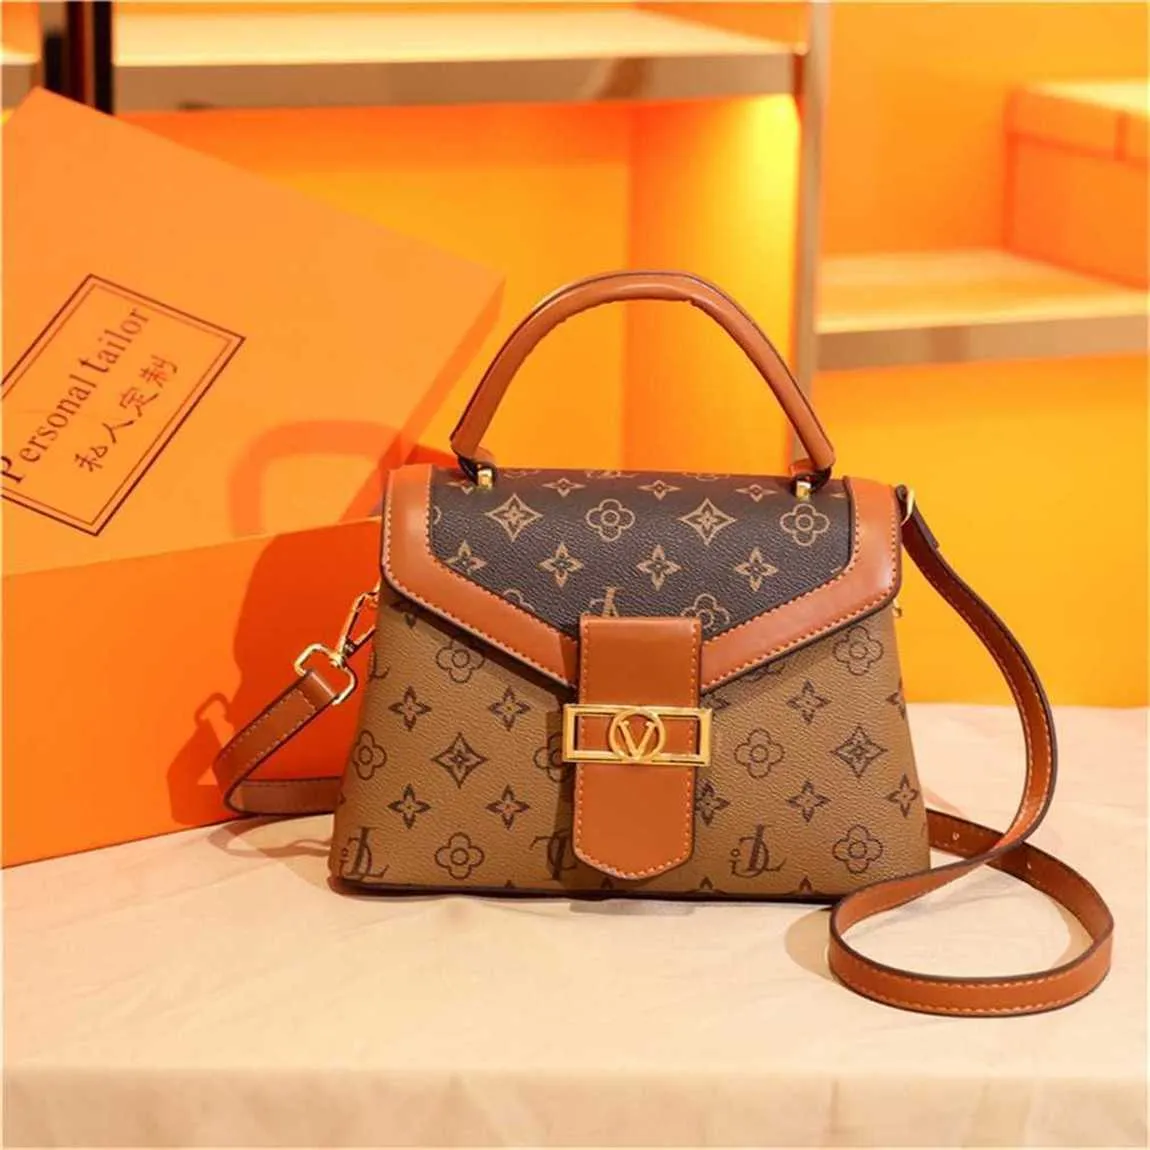 Designer bag Handbags Bags and womens bags are popular this year. One elegant small square bags are trendy and can be paired with crossbody casual womens bags